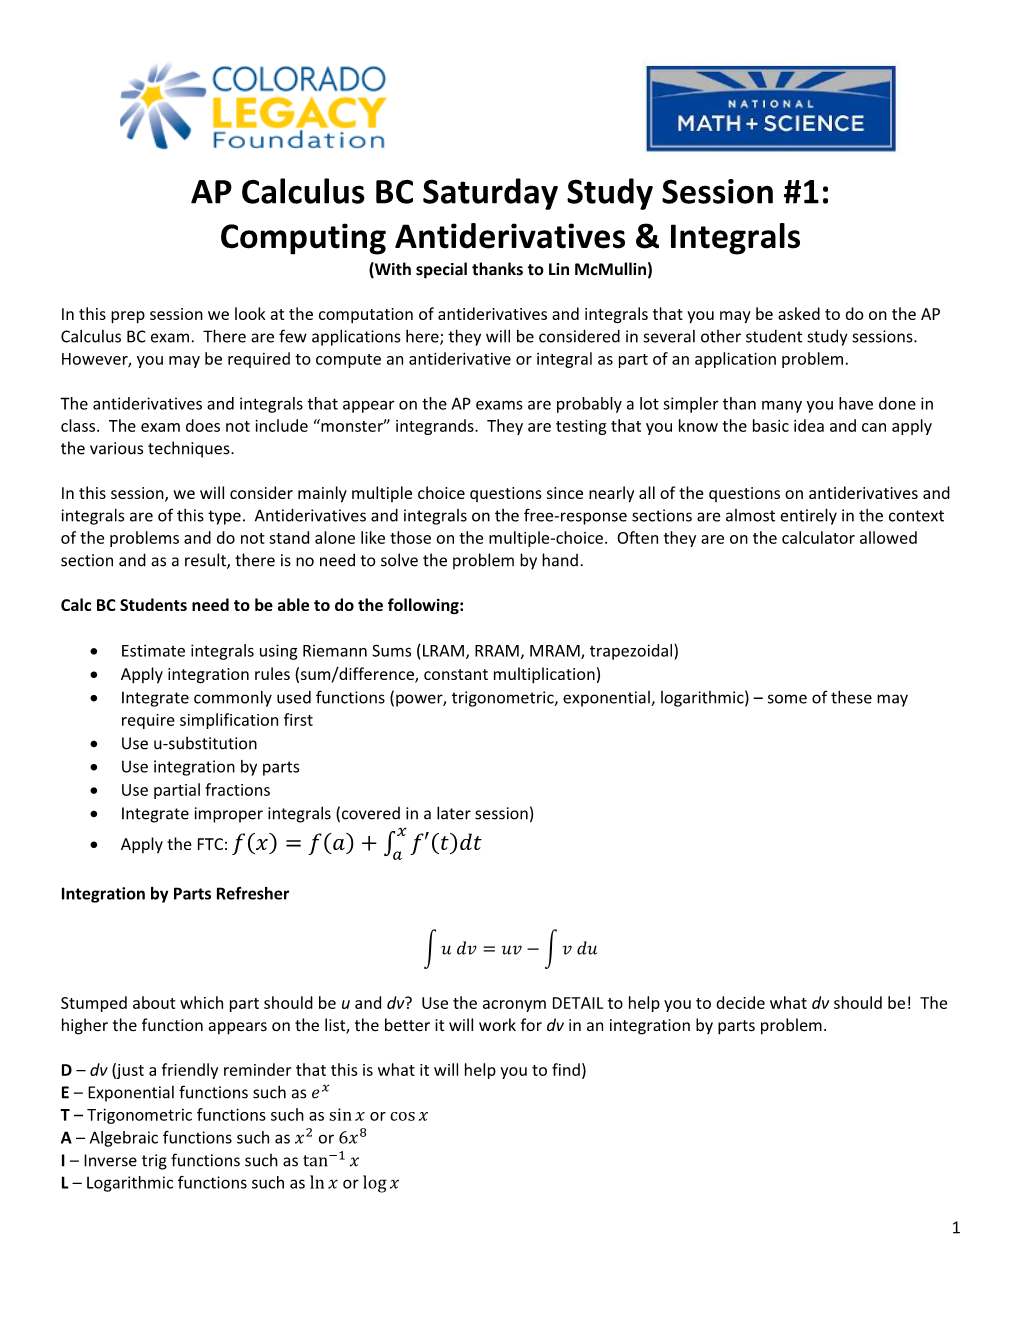 AP Calculus BC Saturday Study Session #1: Computing Antiderivatives & Integrals (With Special Thanks to Lin Mcmullin)